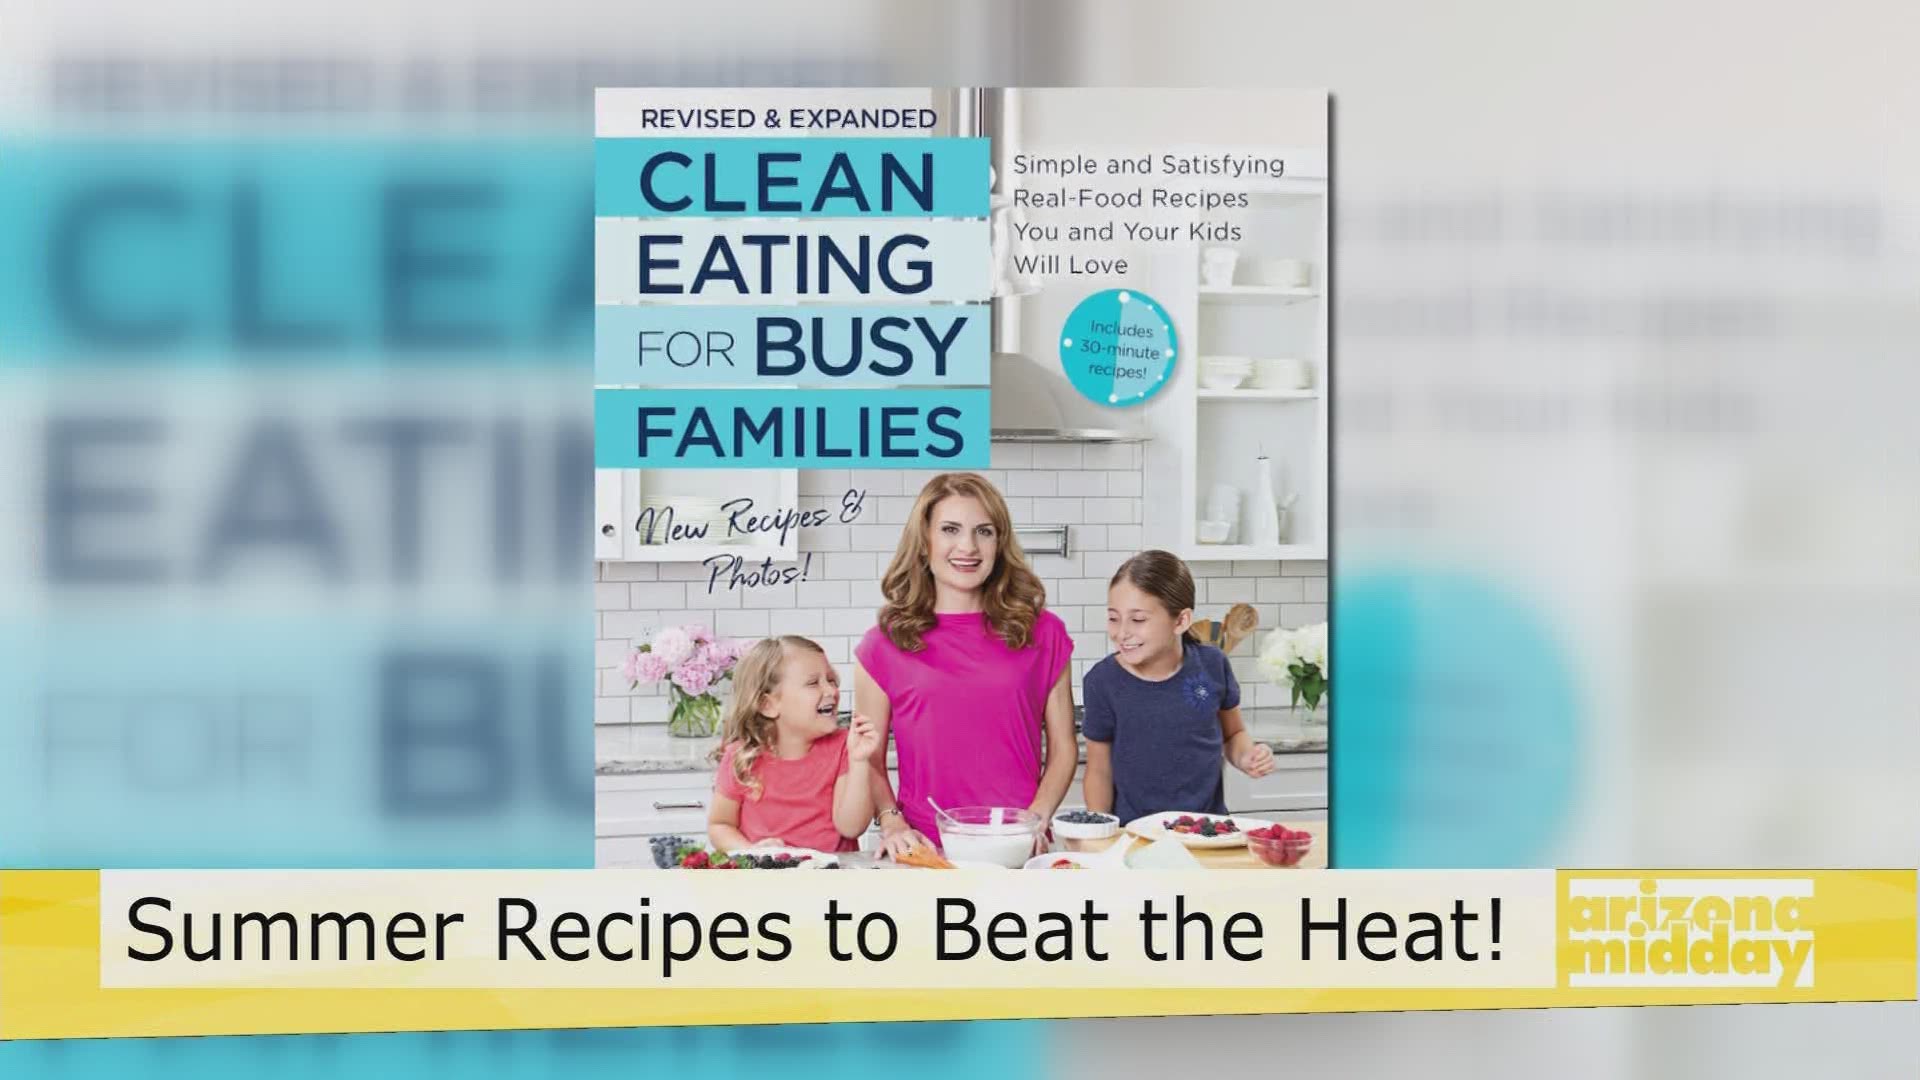 Lifestyle Expert, Michelle Dudash, shows us some simple recipes the kids will love that will help you beat the heat